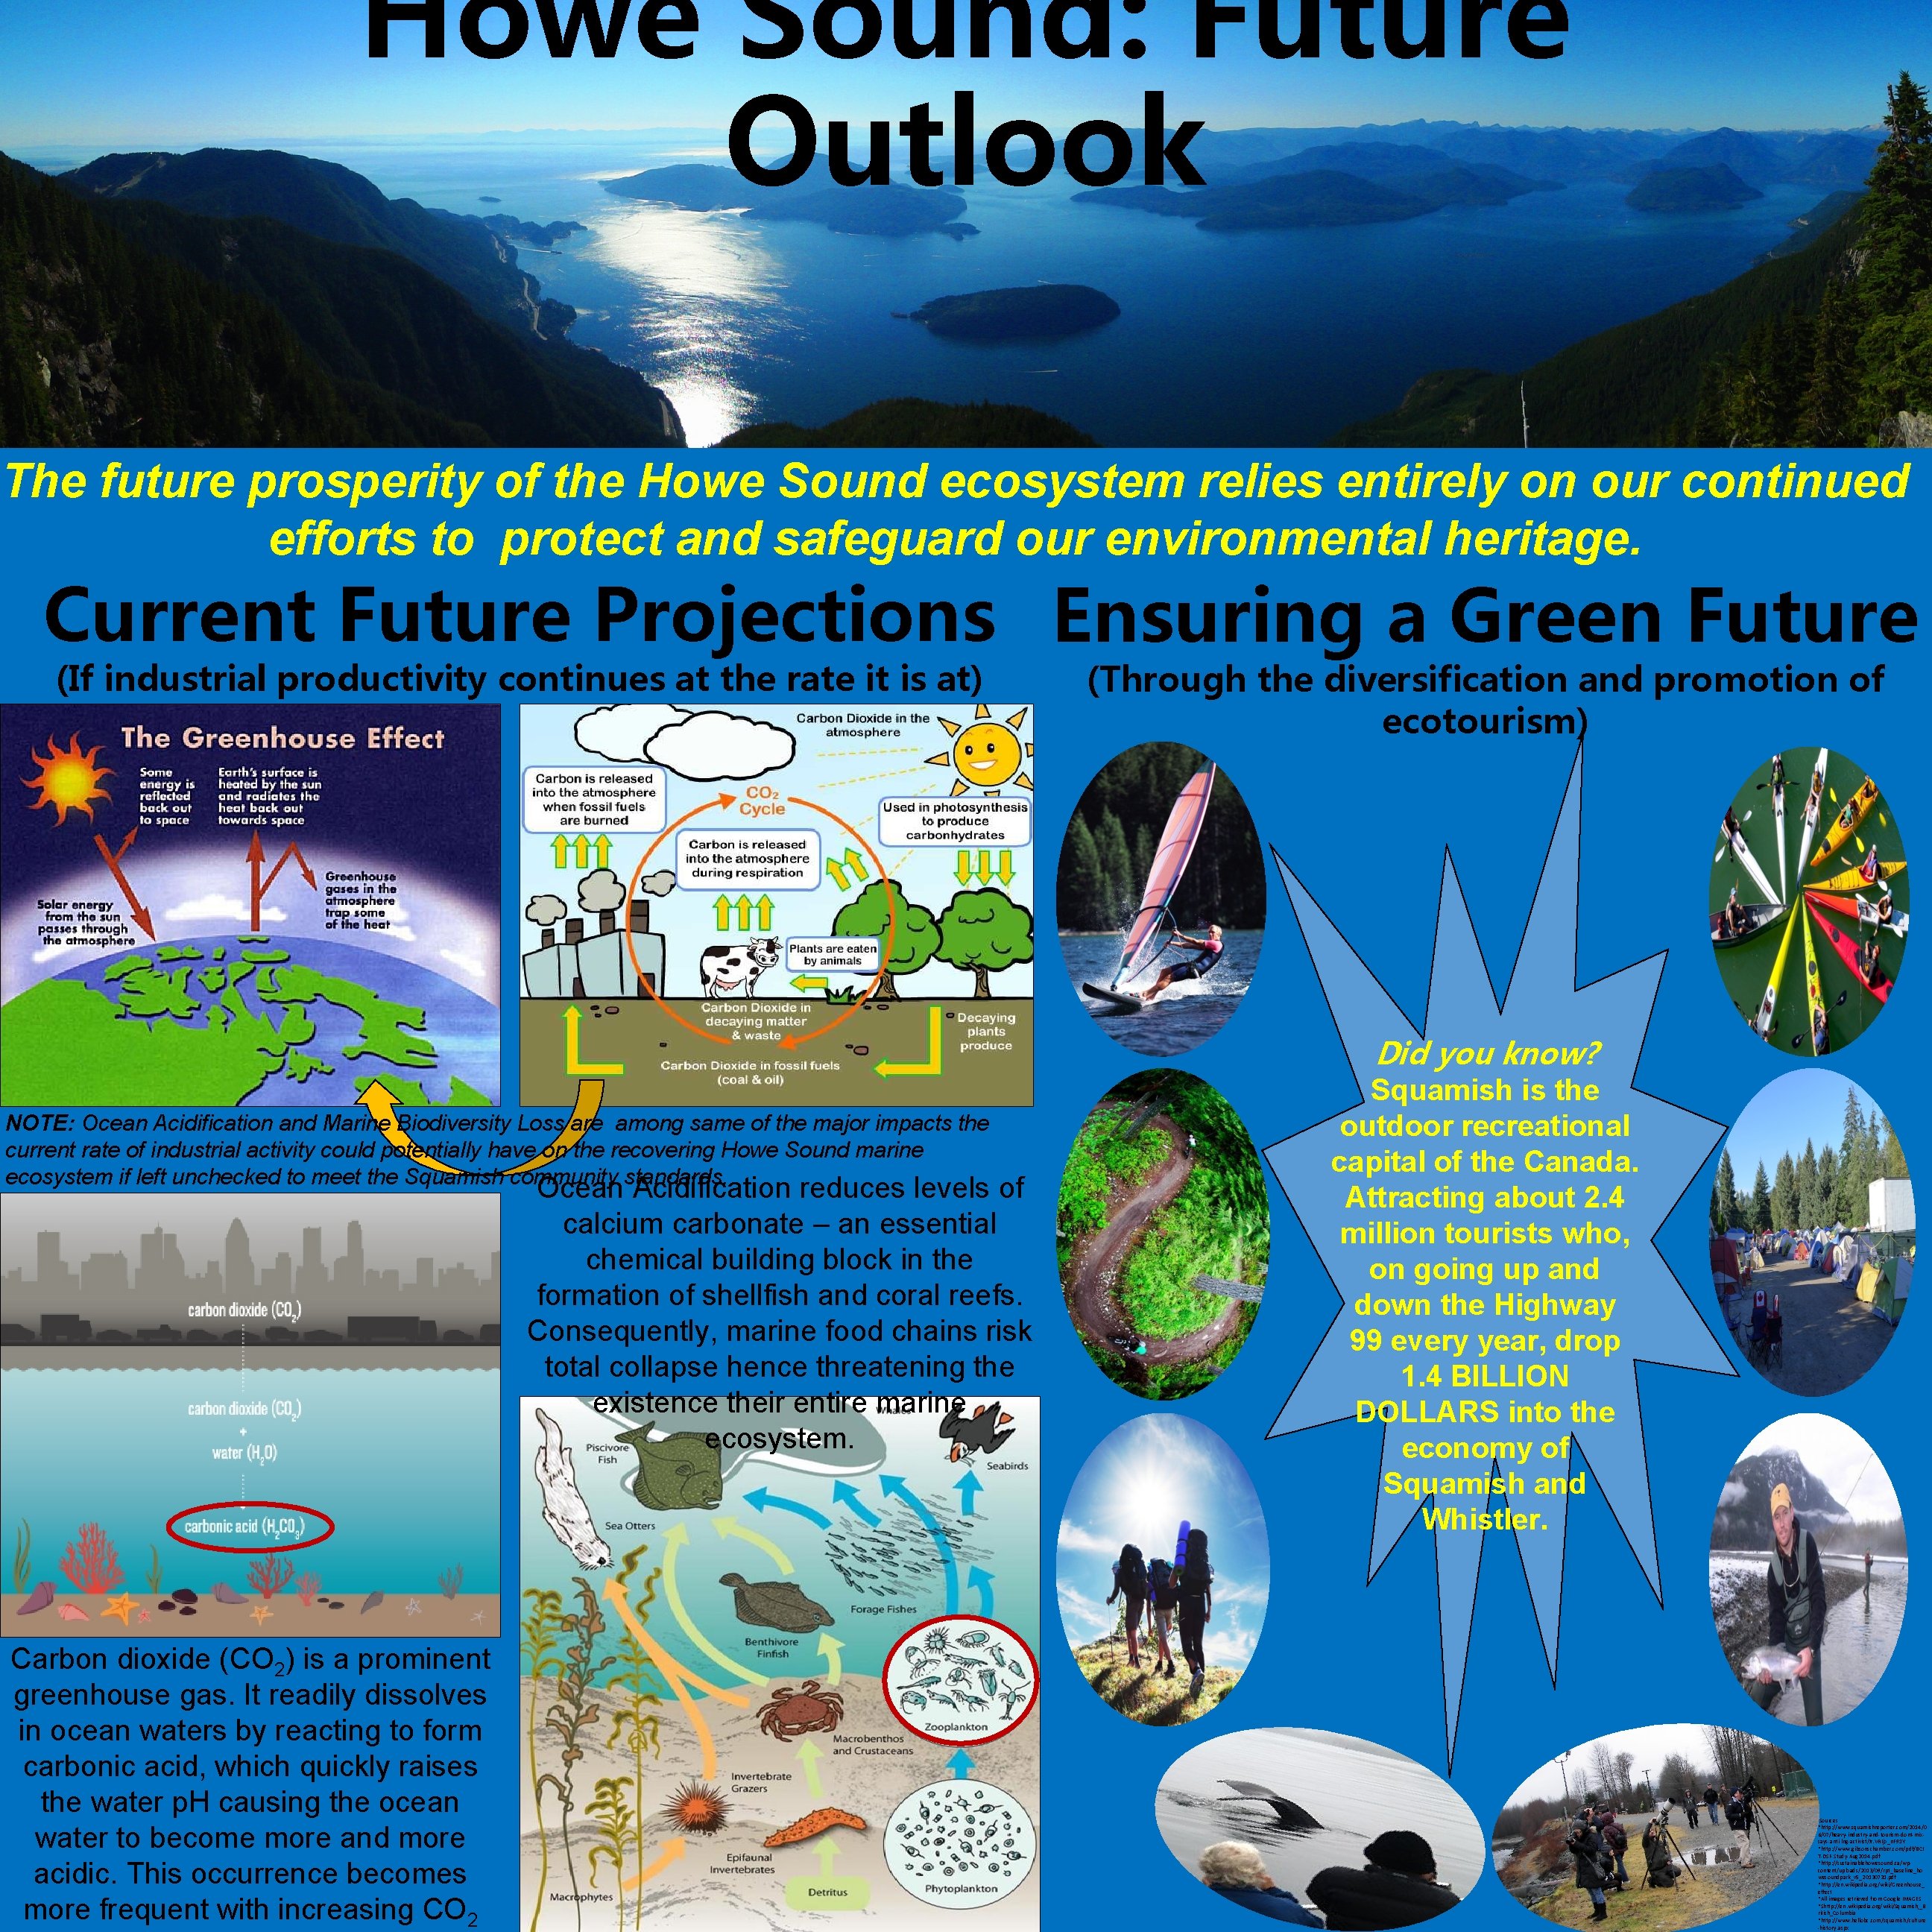 Howe Sound: Future Outlook The future prosperity of the Howe Sound ecosystem relies entirely